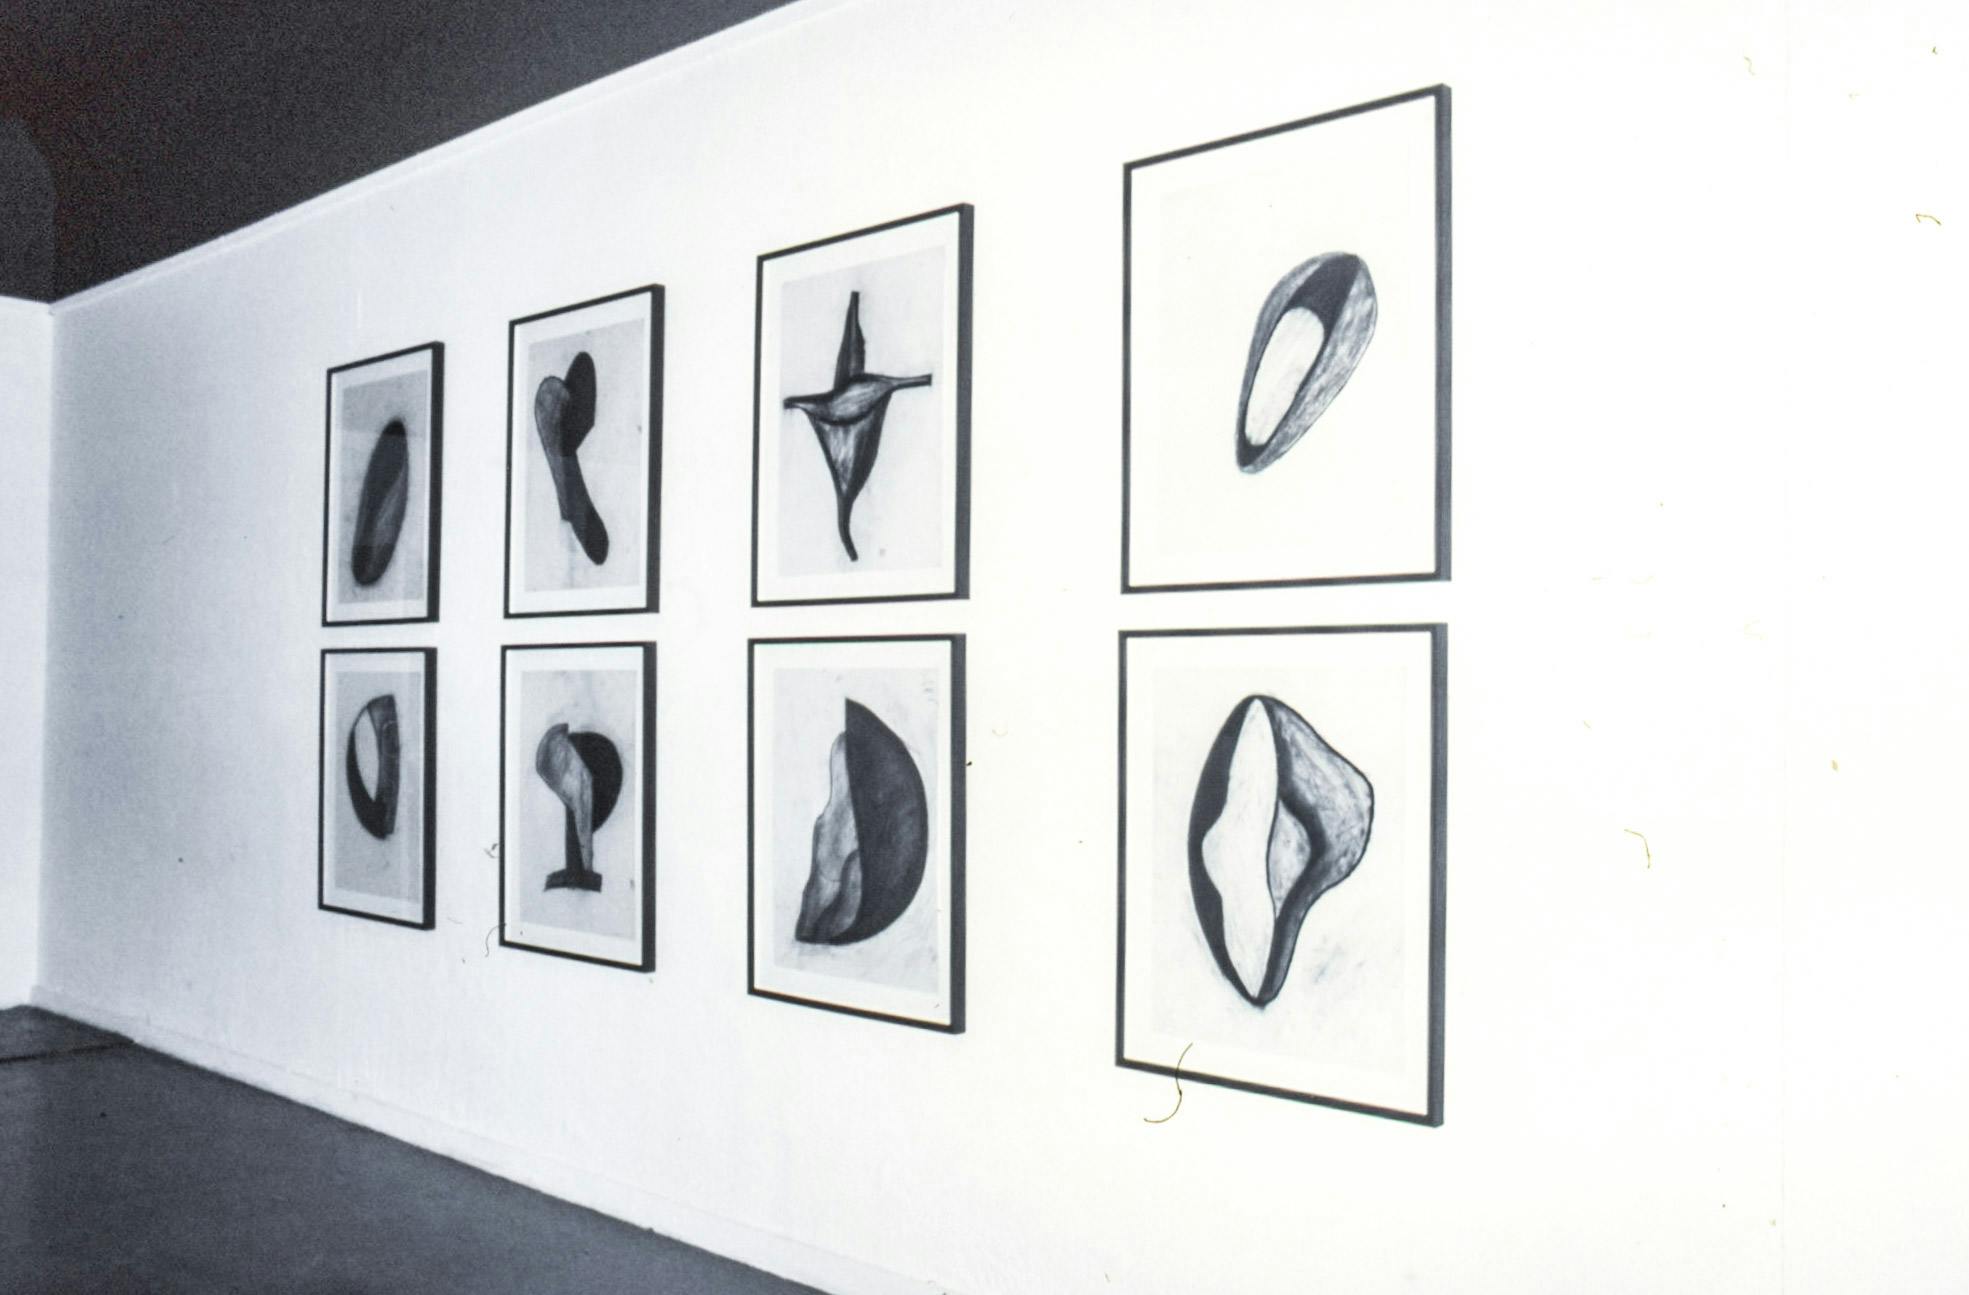 A closeup of 8 charcoal drawings in black frames, mounted on the wall of a dimly lit gallery. The drawings are abstract forms with lots of shading, resembling cornucopia, paint palettes and scrolls.